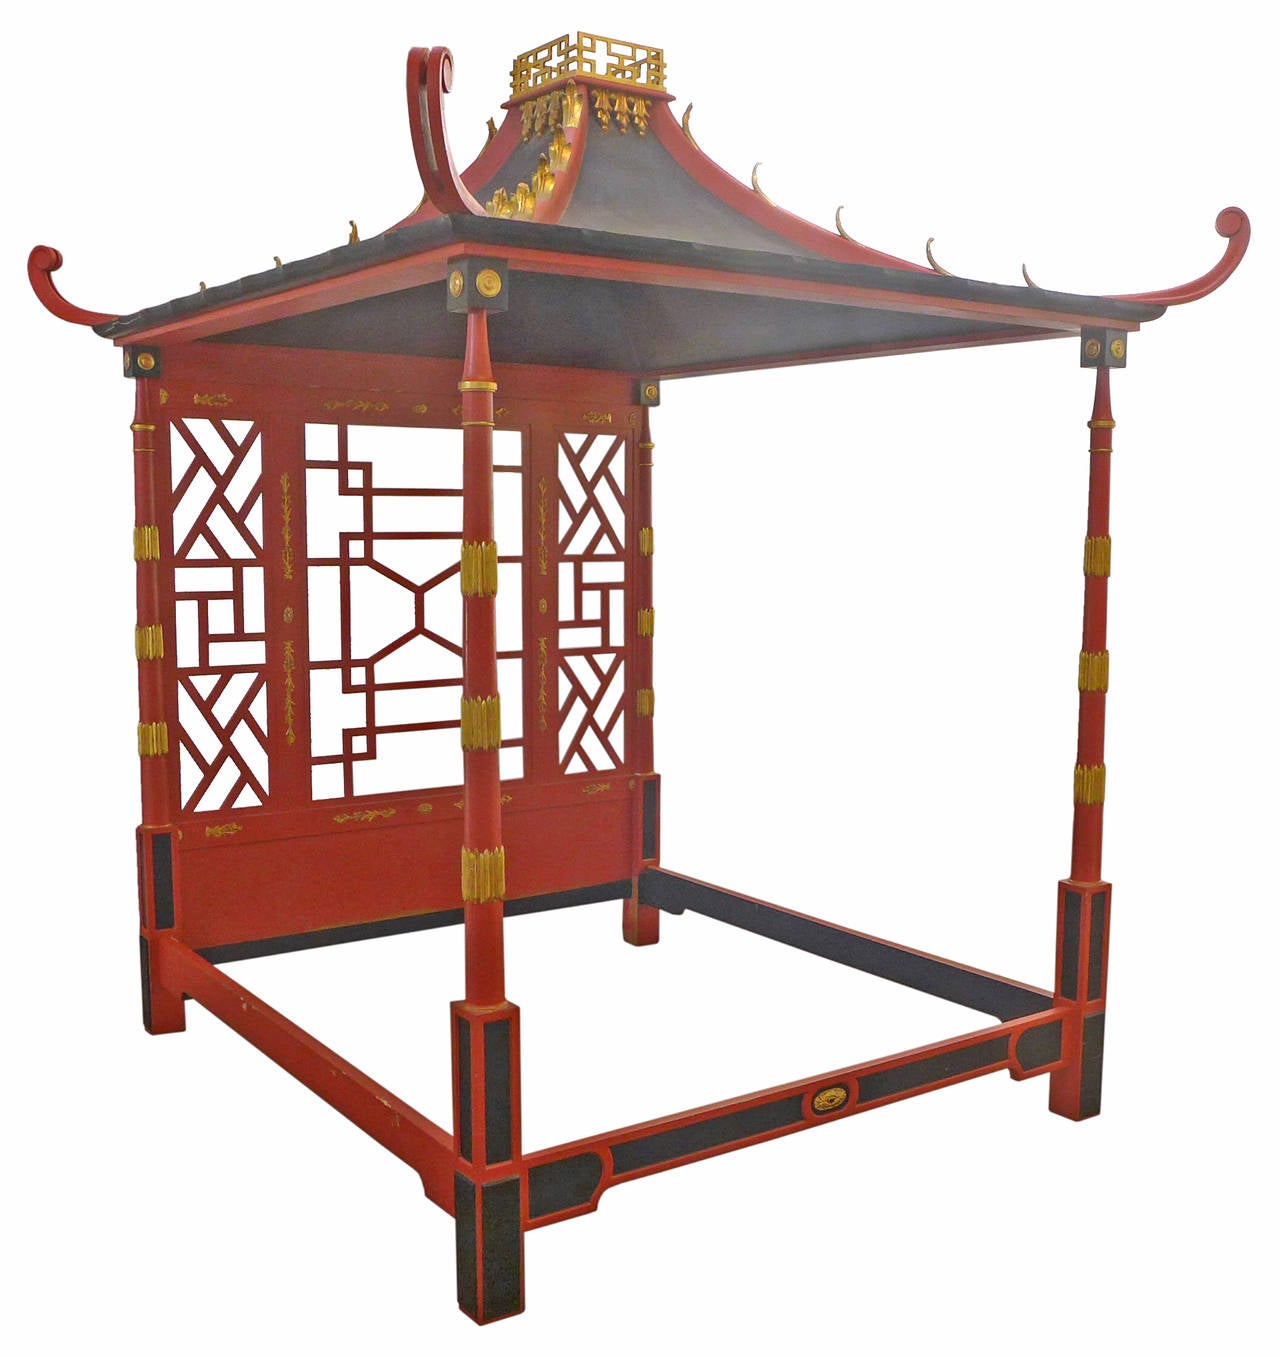 A monumental canopy bed in the form of a traditional Chinese pagoda. An exceptional example of chinoiserie, clearly and faithfully recreating the celebrated English 18th century Badminton bed by John Linnell. This design comes to us from the very